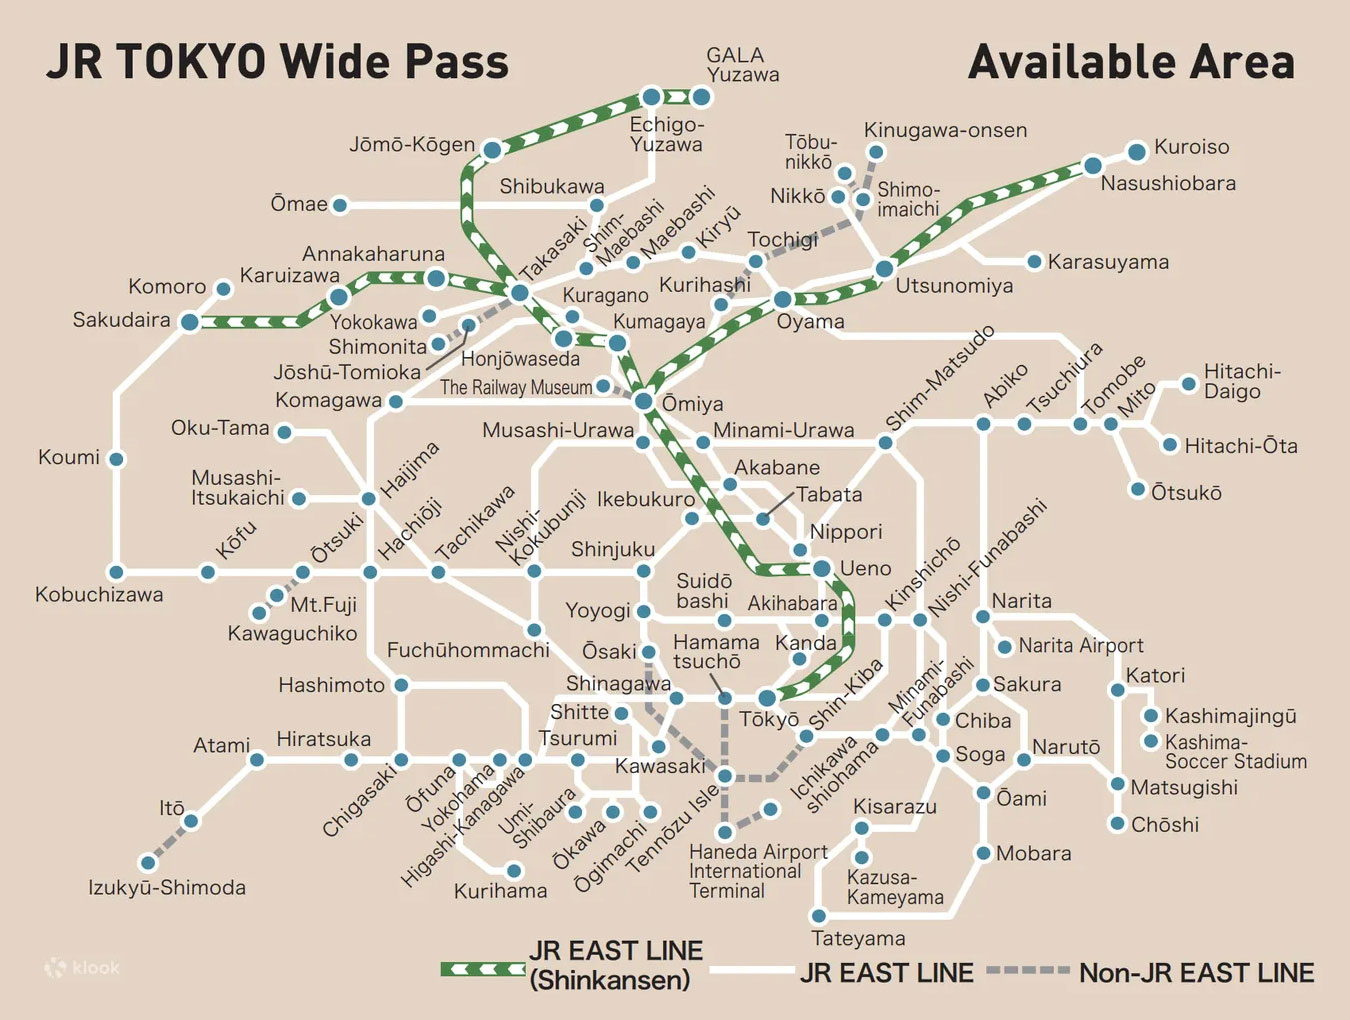 jr tokyo wide pass available area